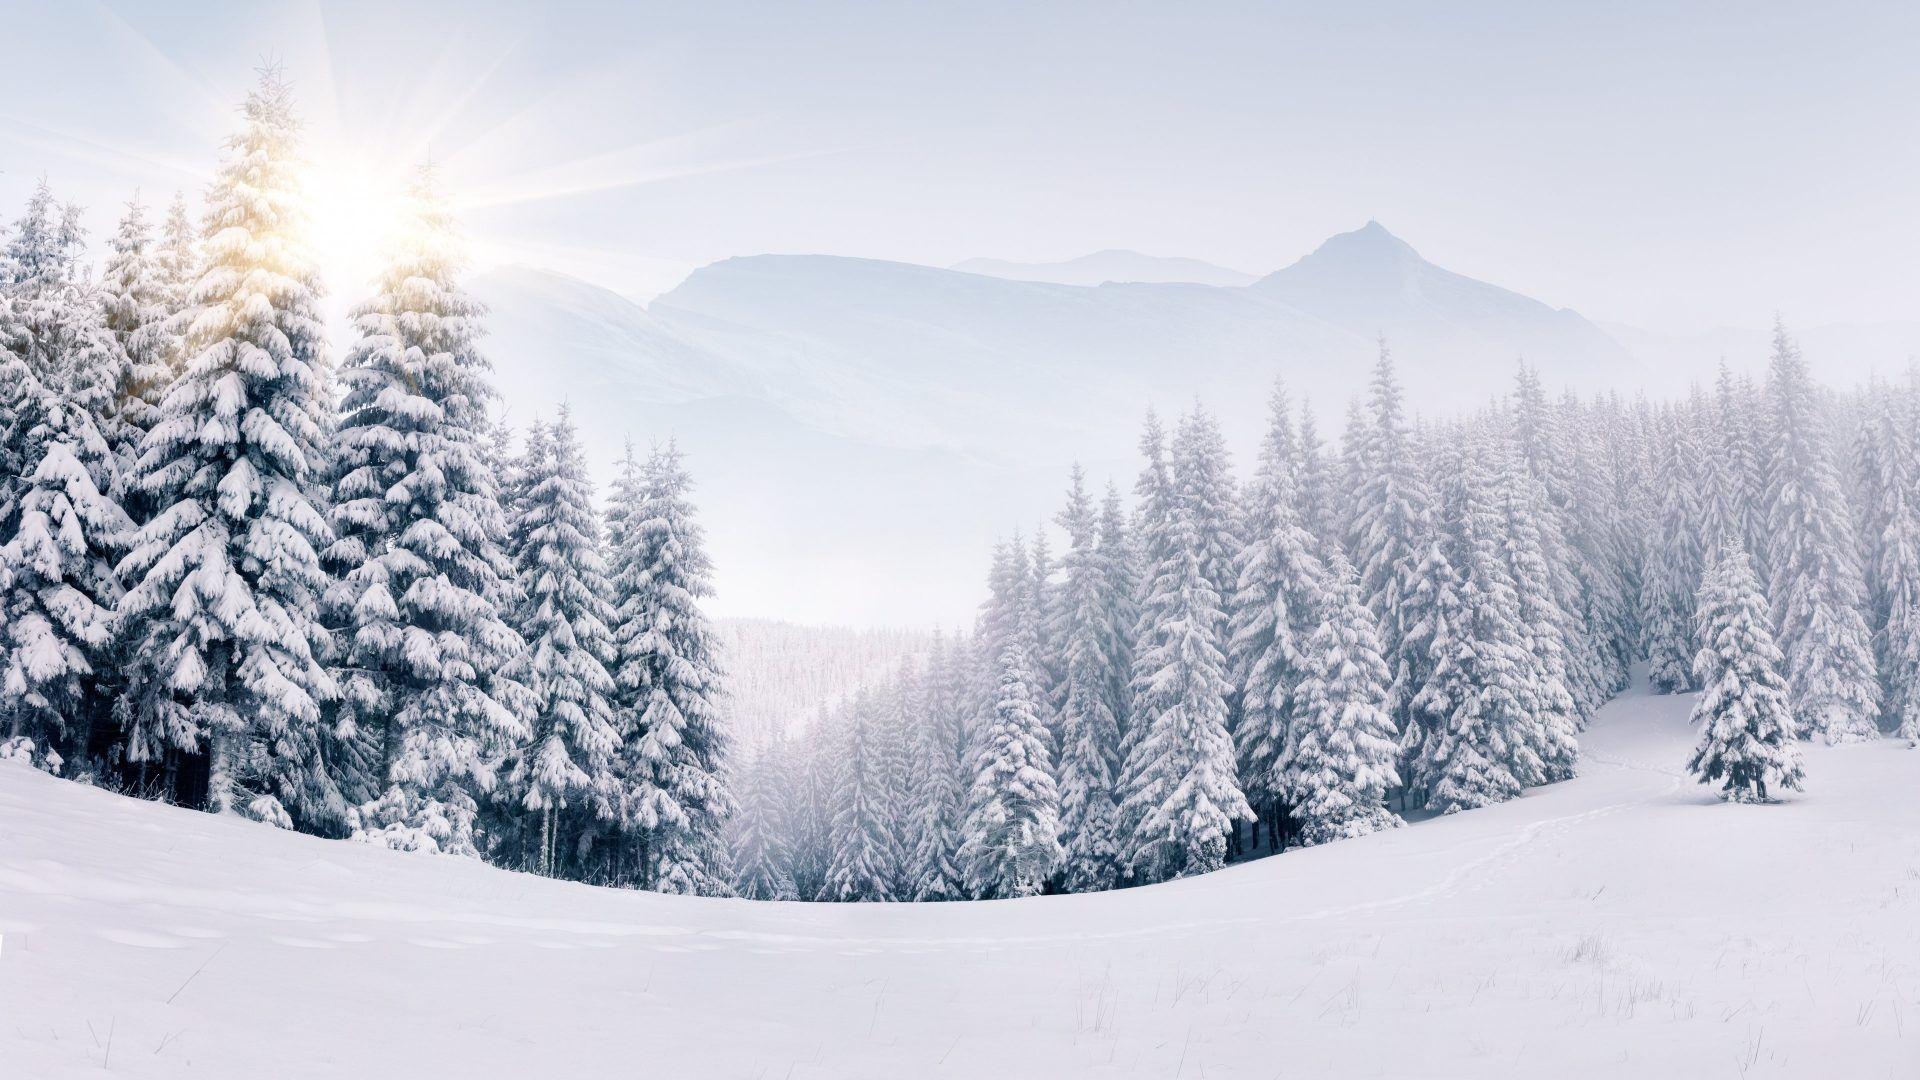 Snow Fall Wallpapers Top Free Snow Fall Backgrounds W - vrogue.co